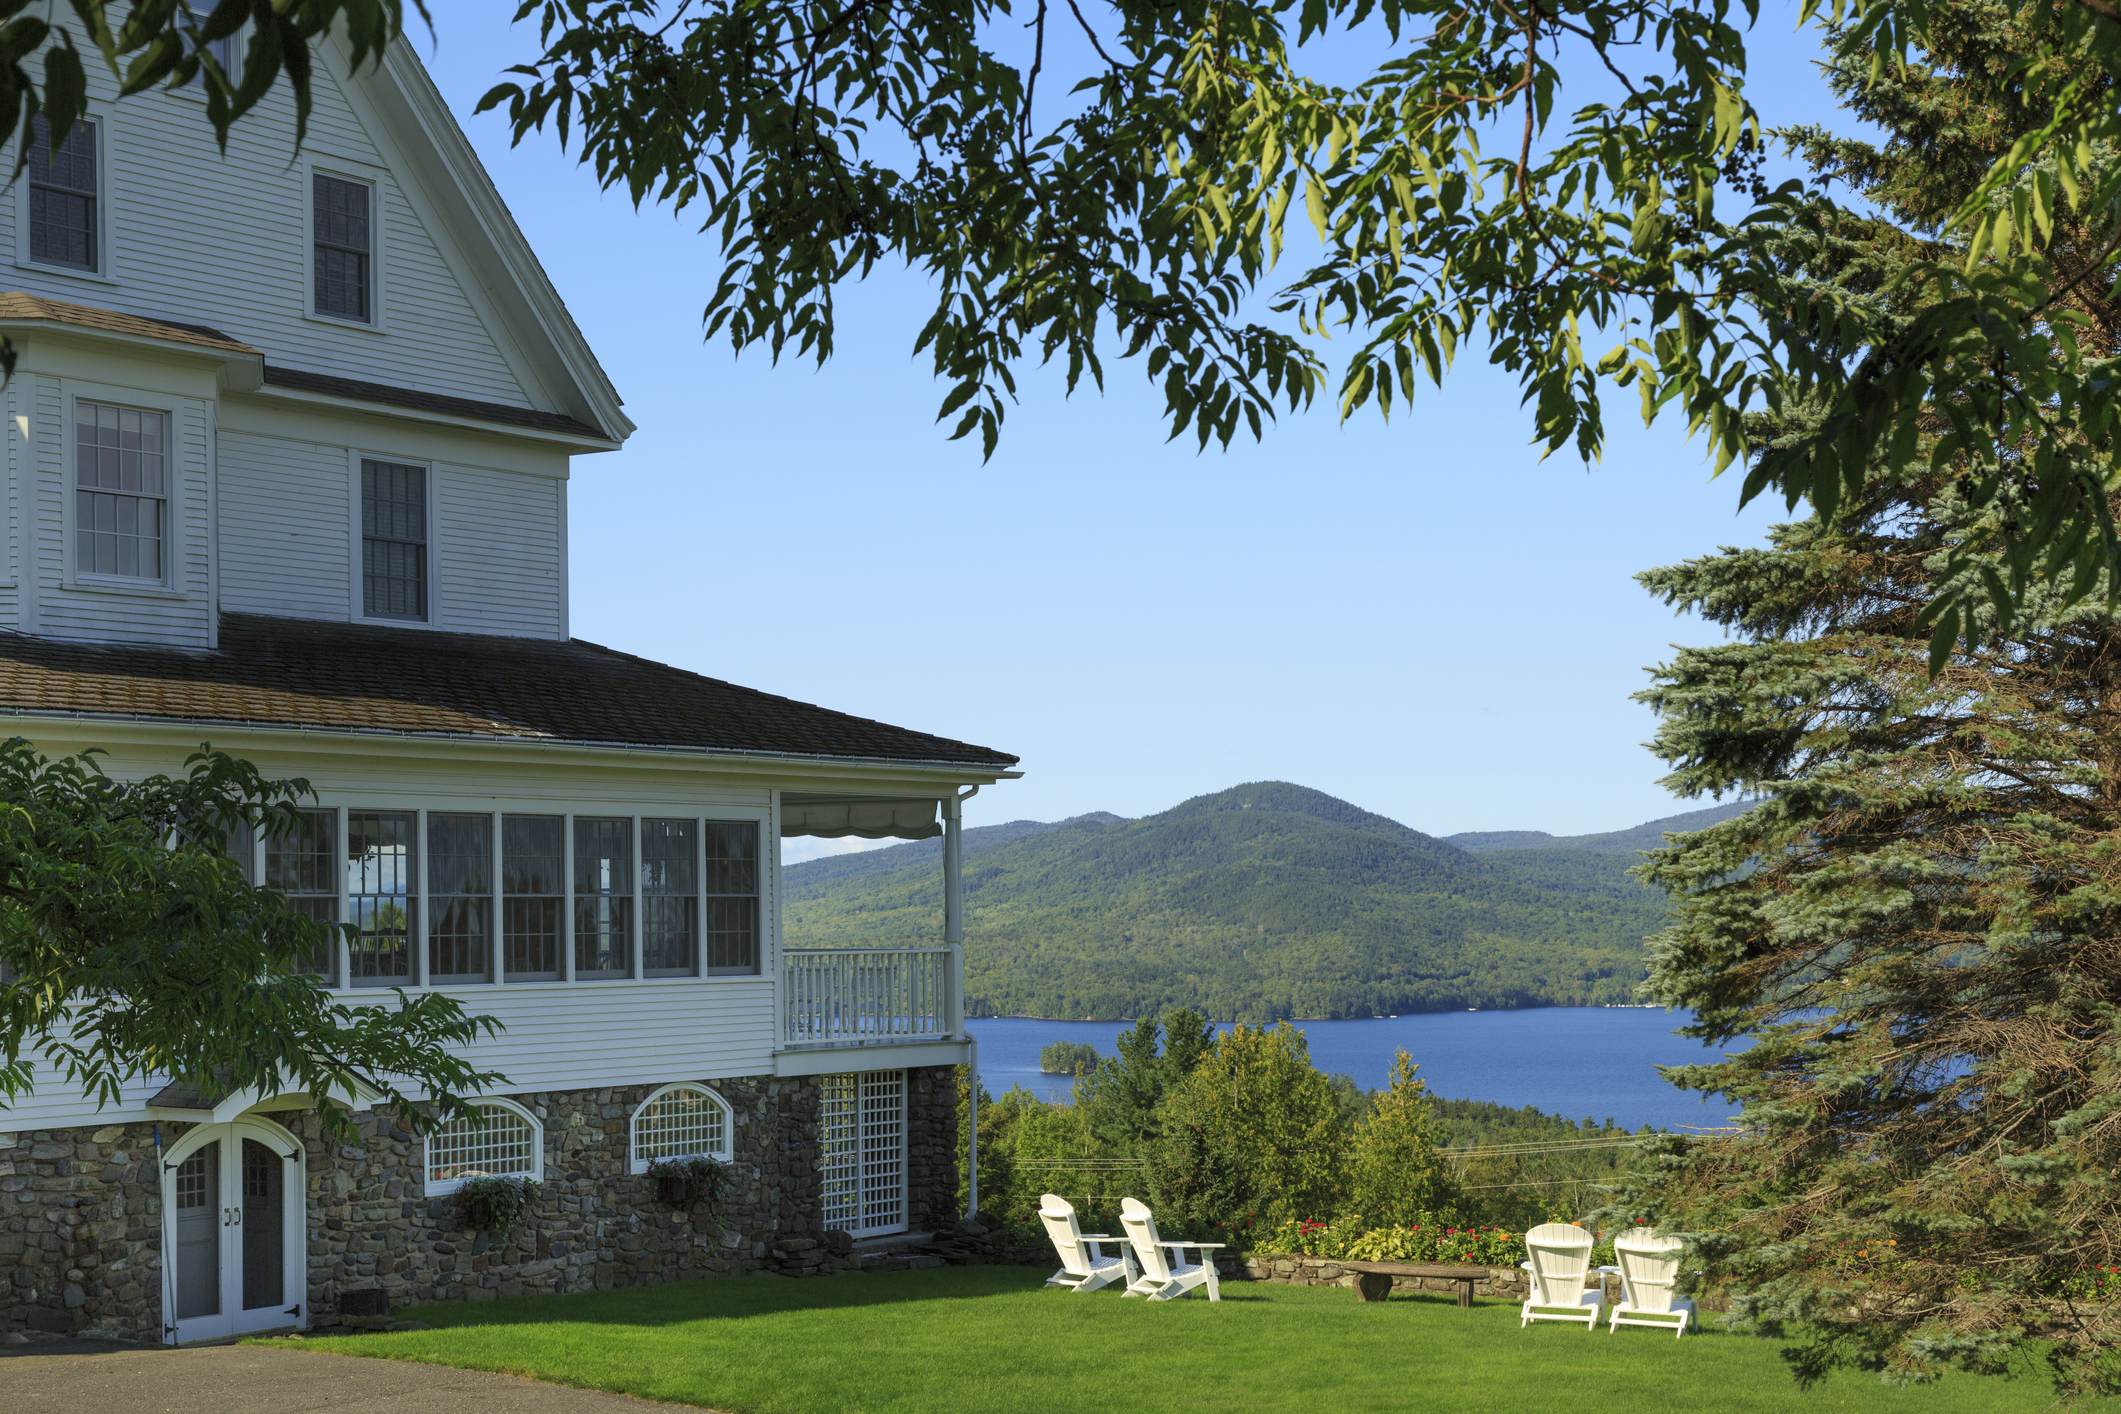 House and Adirondack chairs overlooking Moosehead Lake in Maine